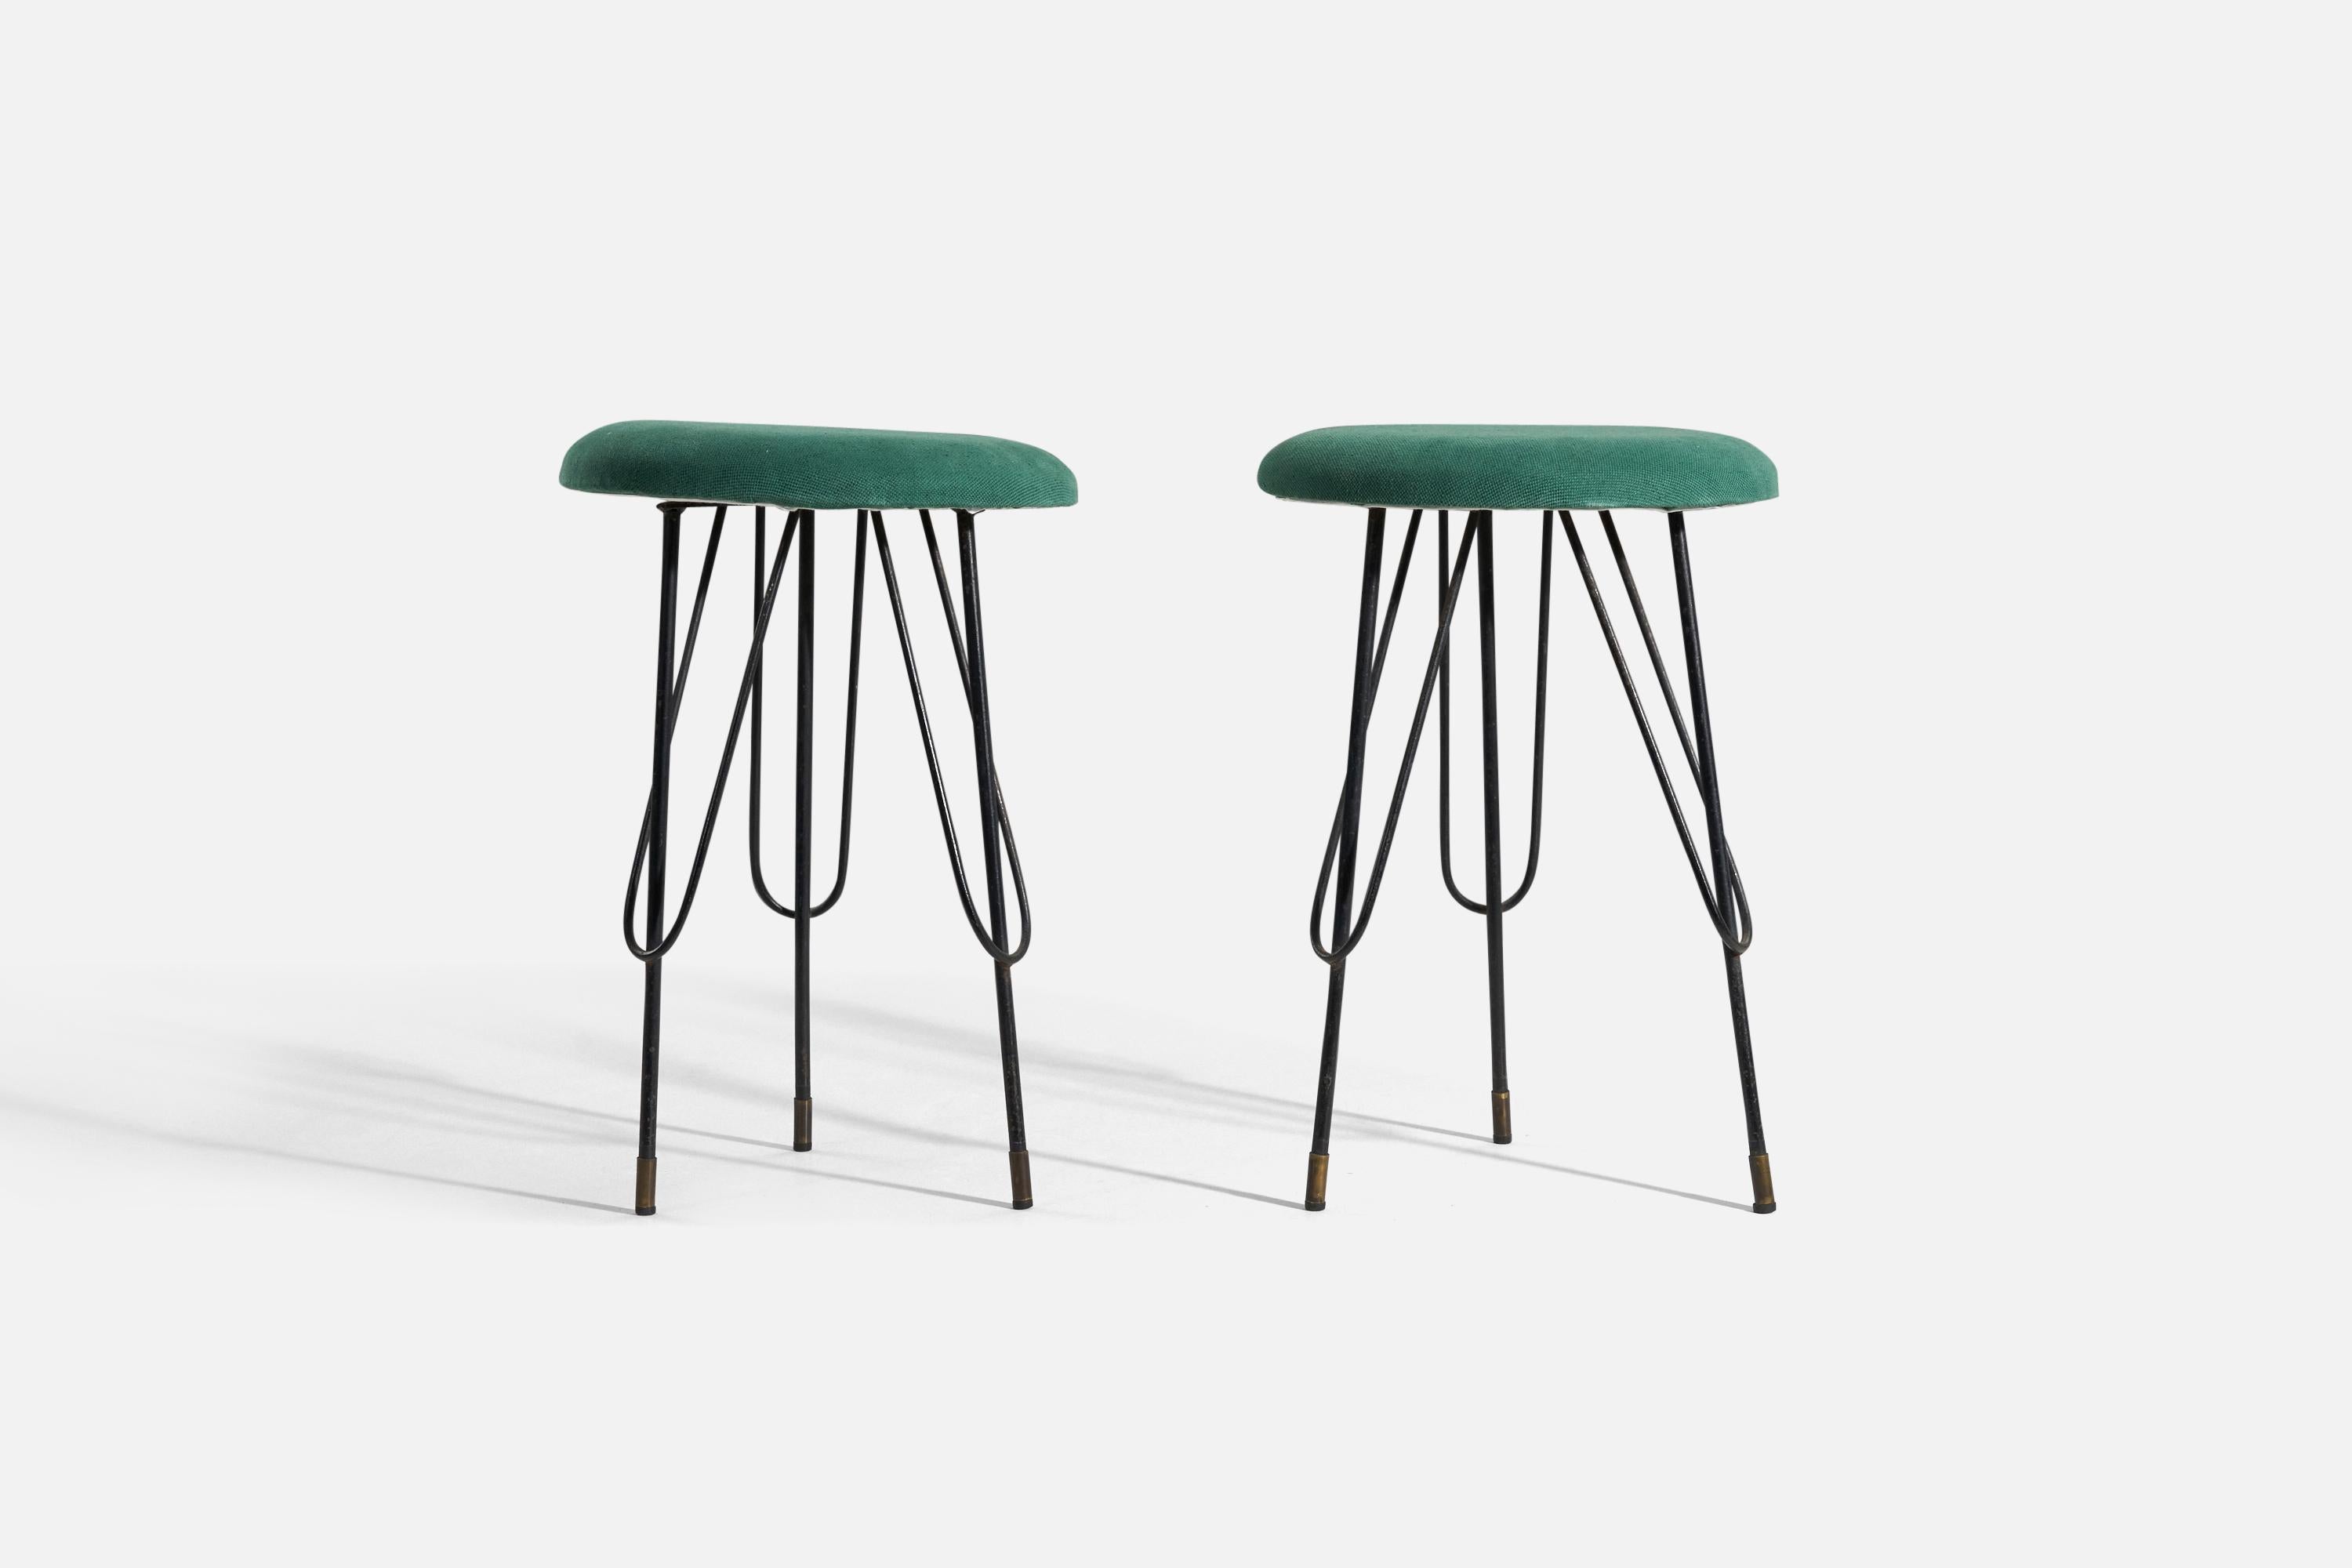 A pair of metal and velvet stools designed and produced by an Italian designer, Italy, c. 1950s.